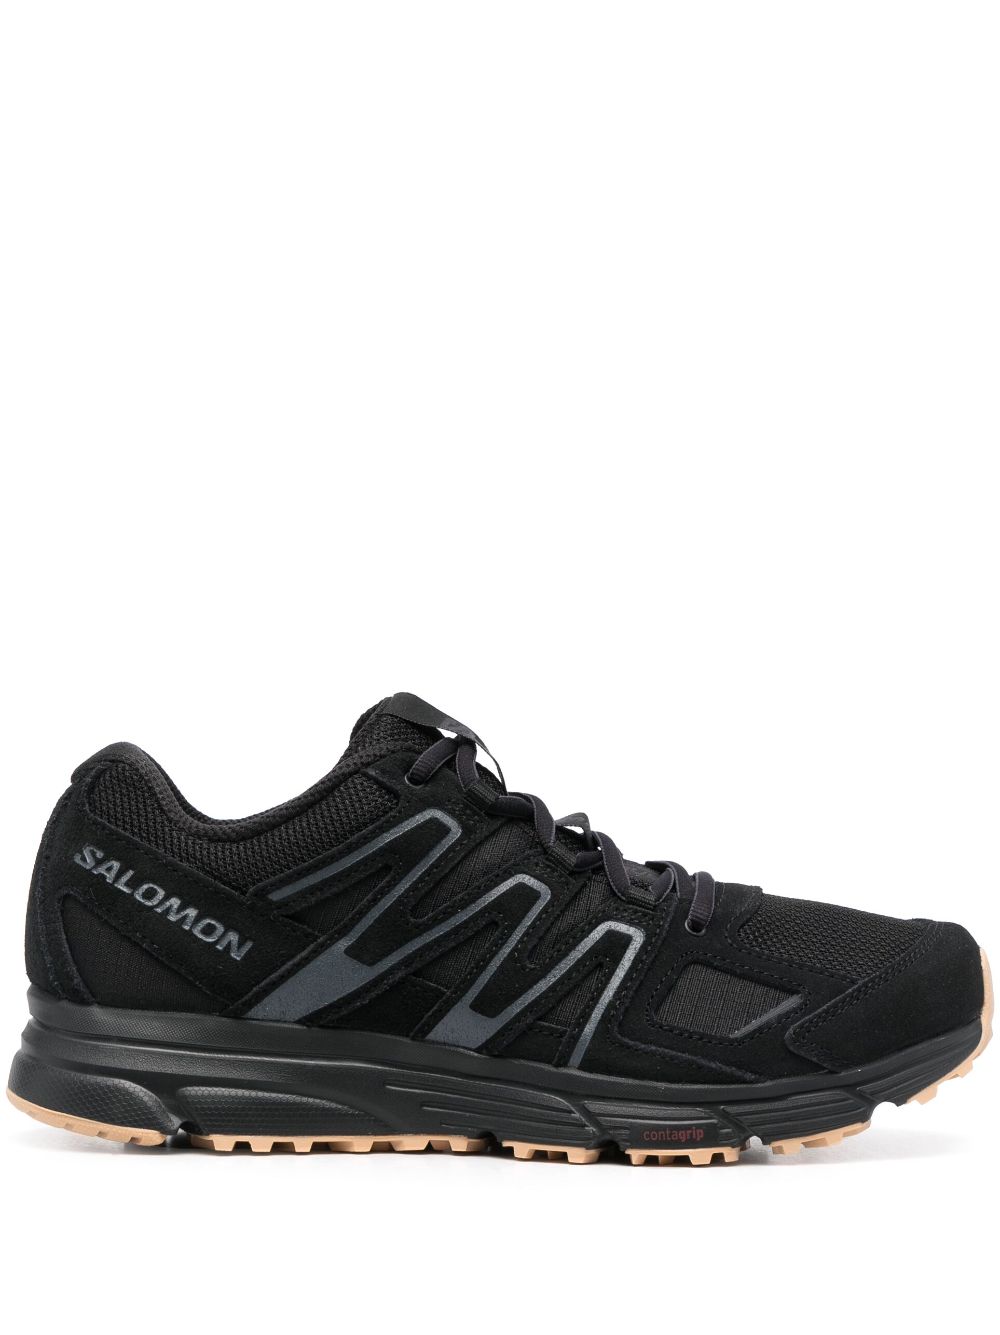 Image 1 of Salomon X-Mission 4 suede sneakers